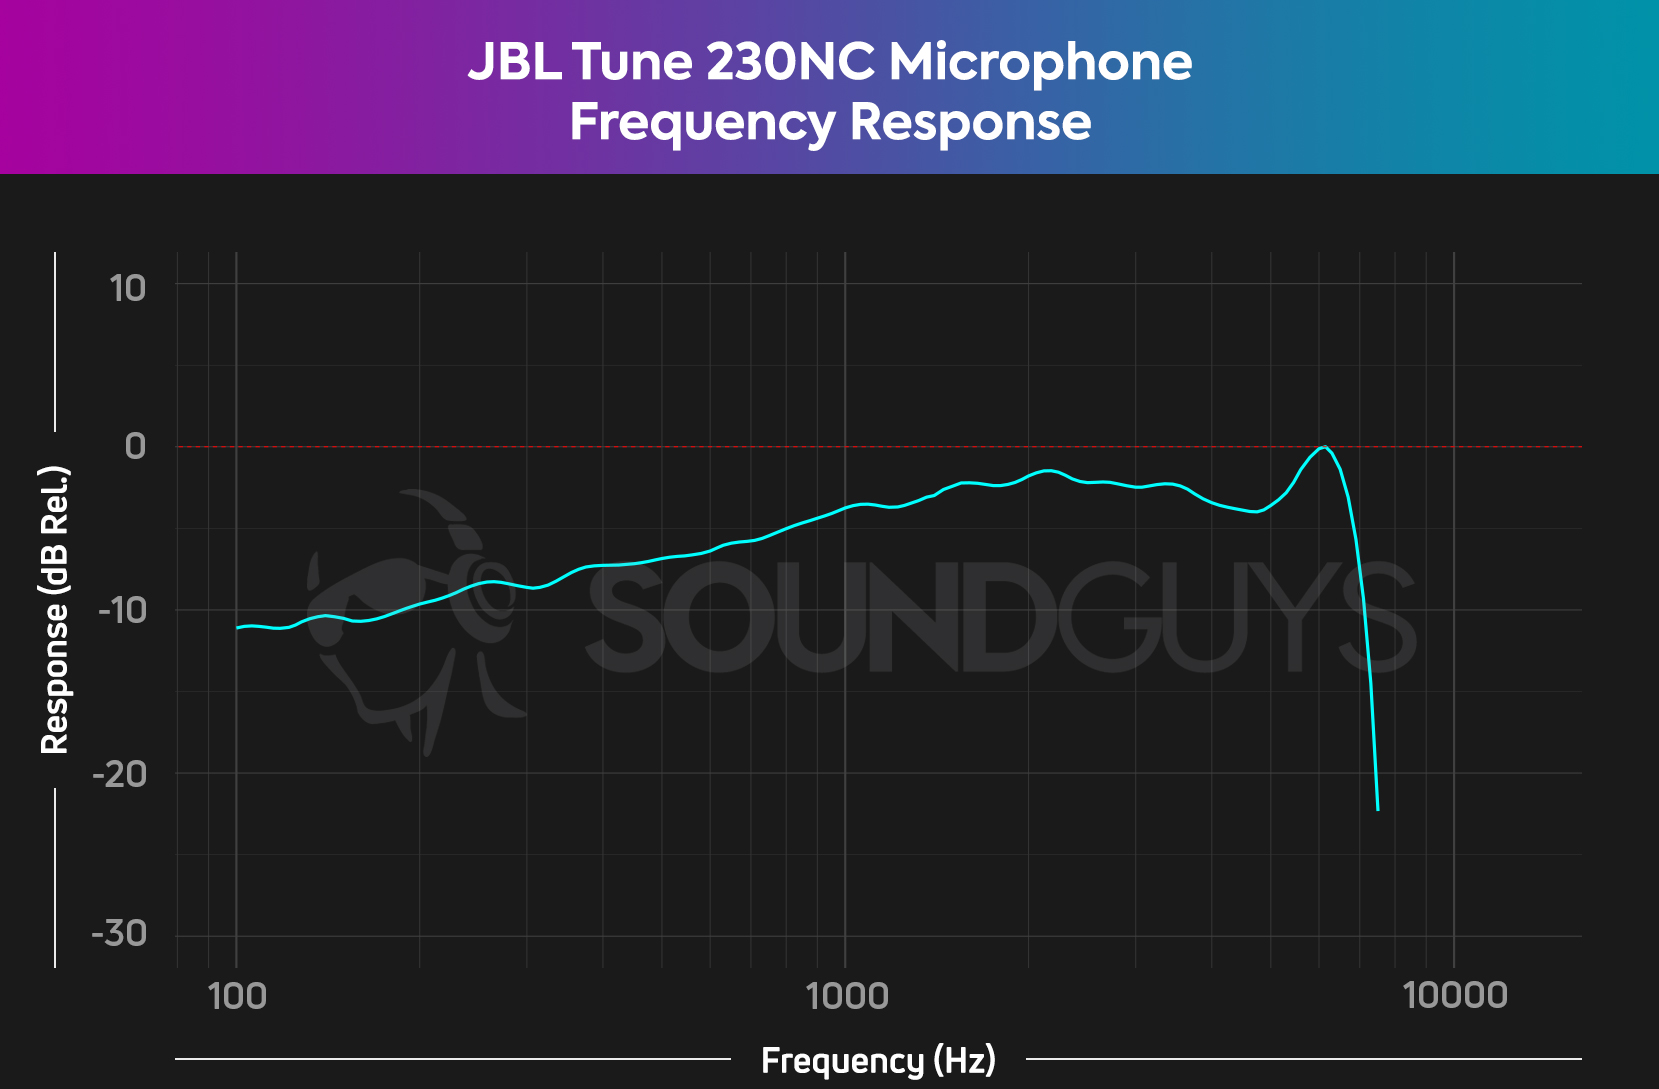 A frequency response chart shows the microphone performance of the JBL Tune 230NC.